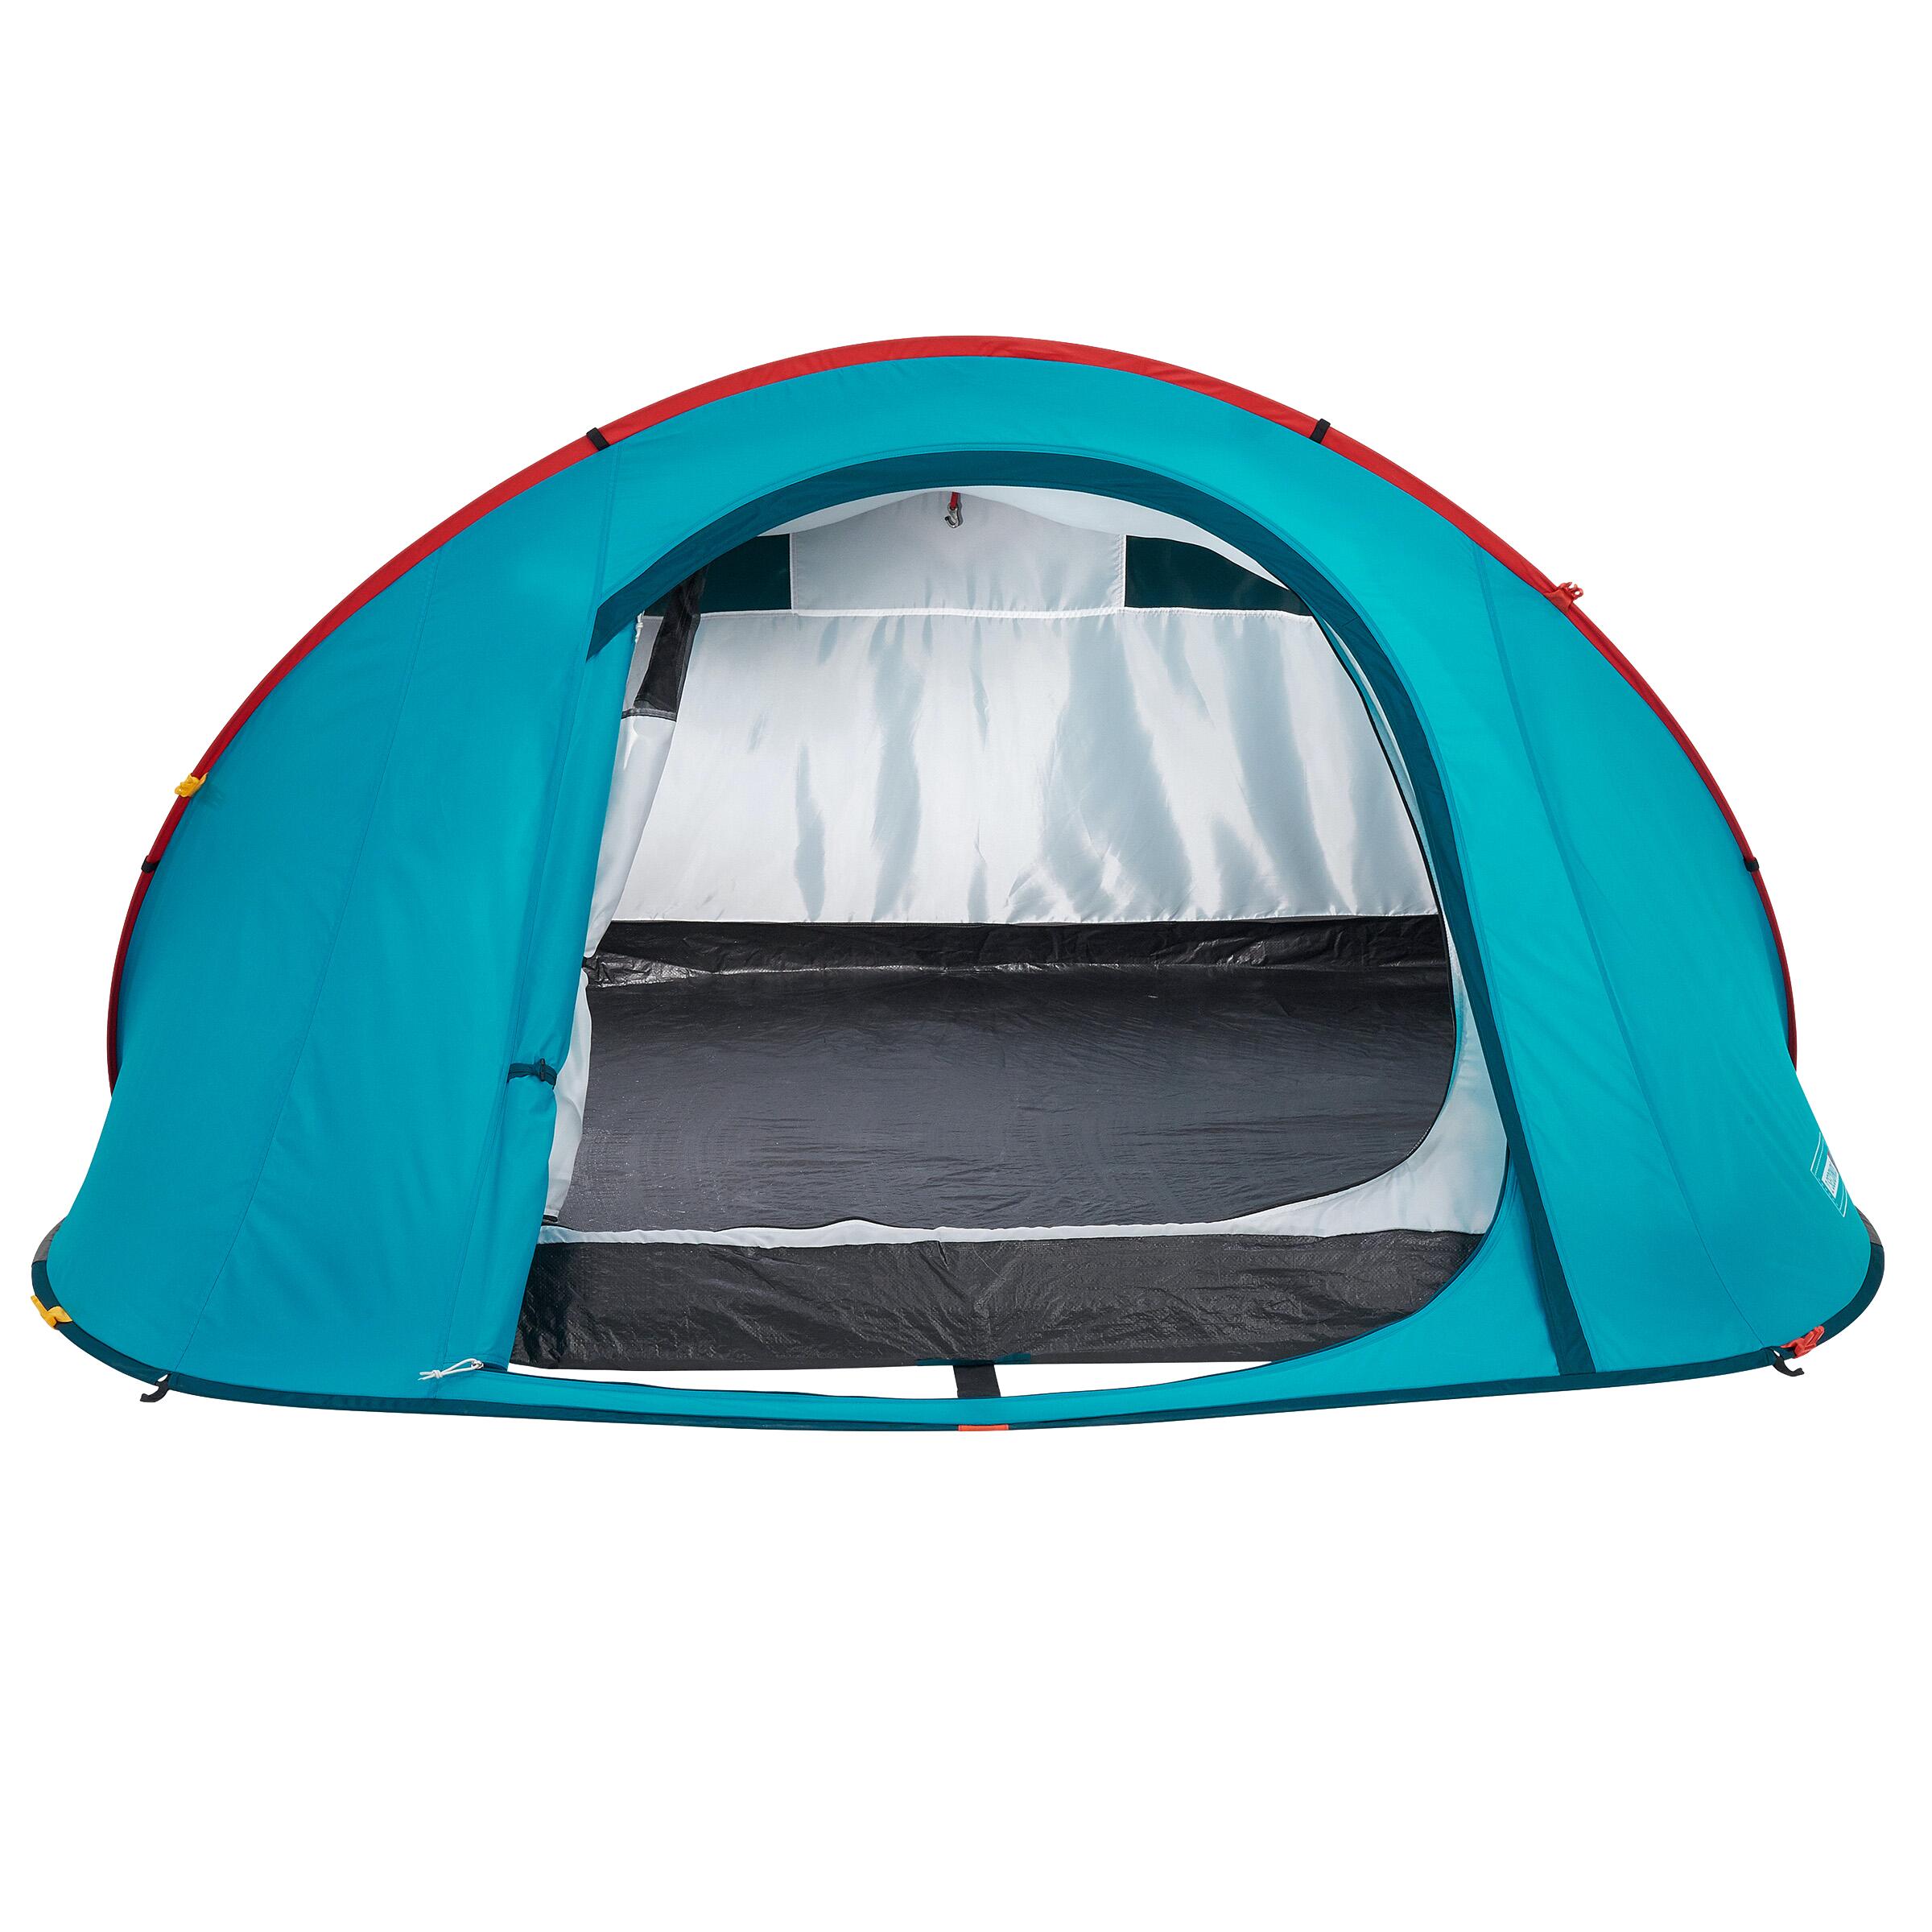 Camping tent - 2 SECONDS - 3-person 10/26